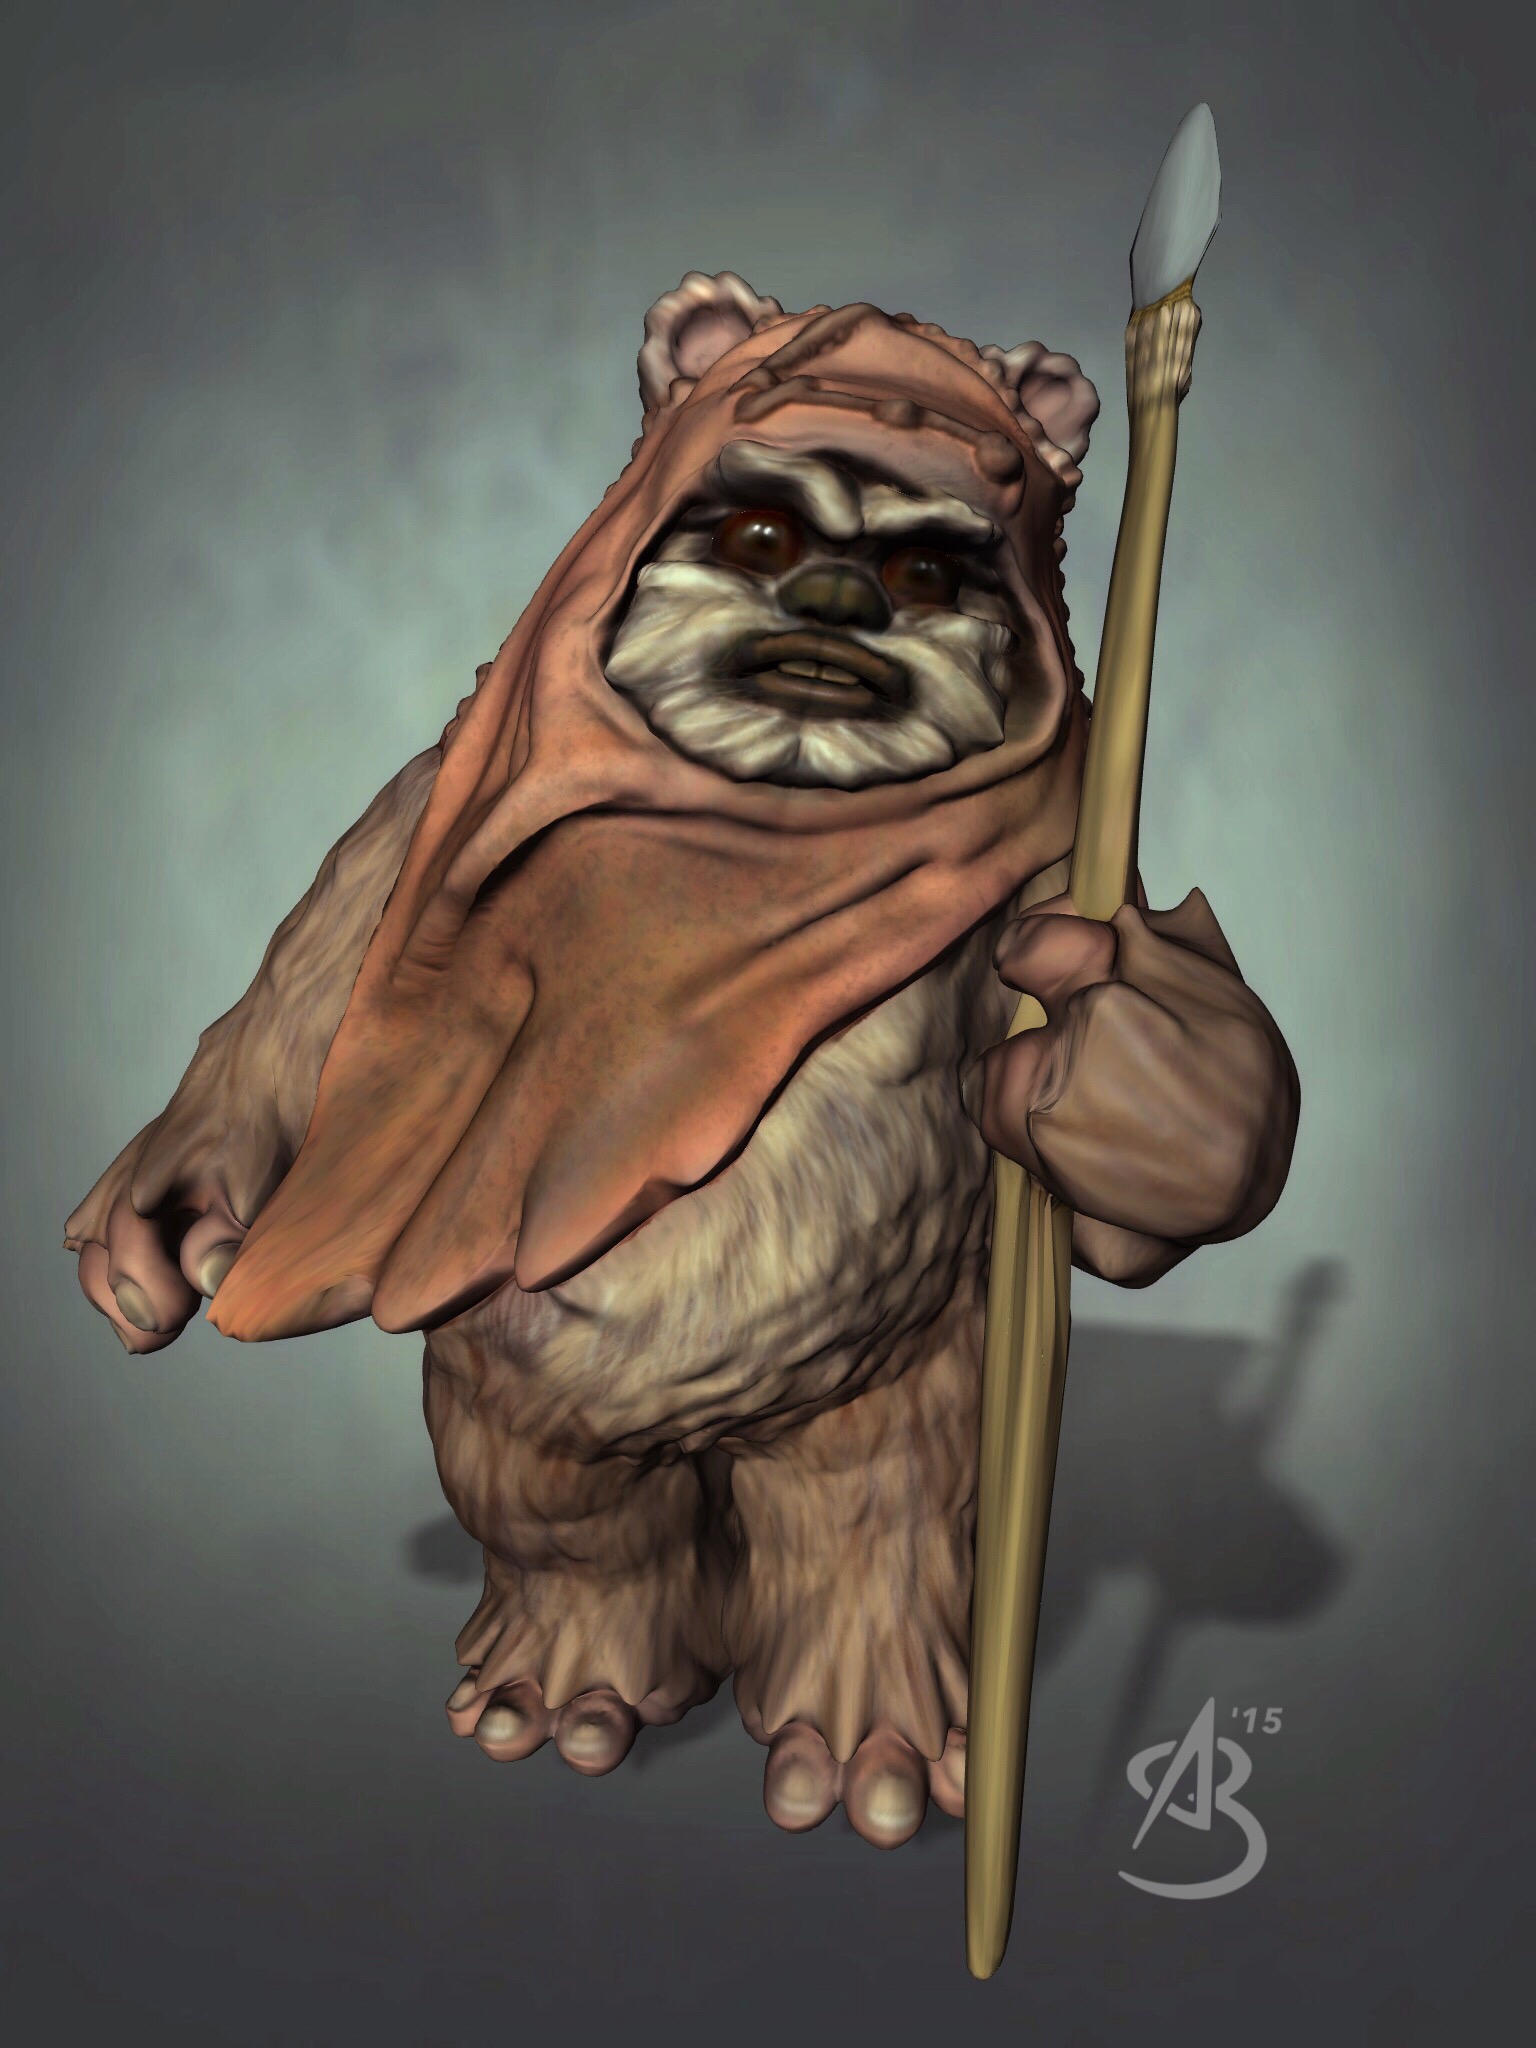 Ewok paintings search result at PaintingValley.com